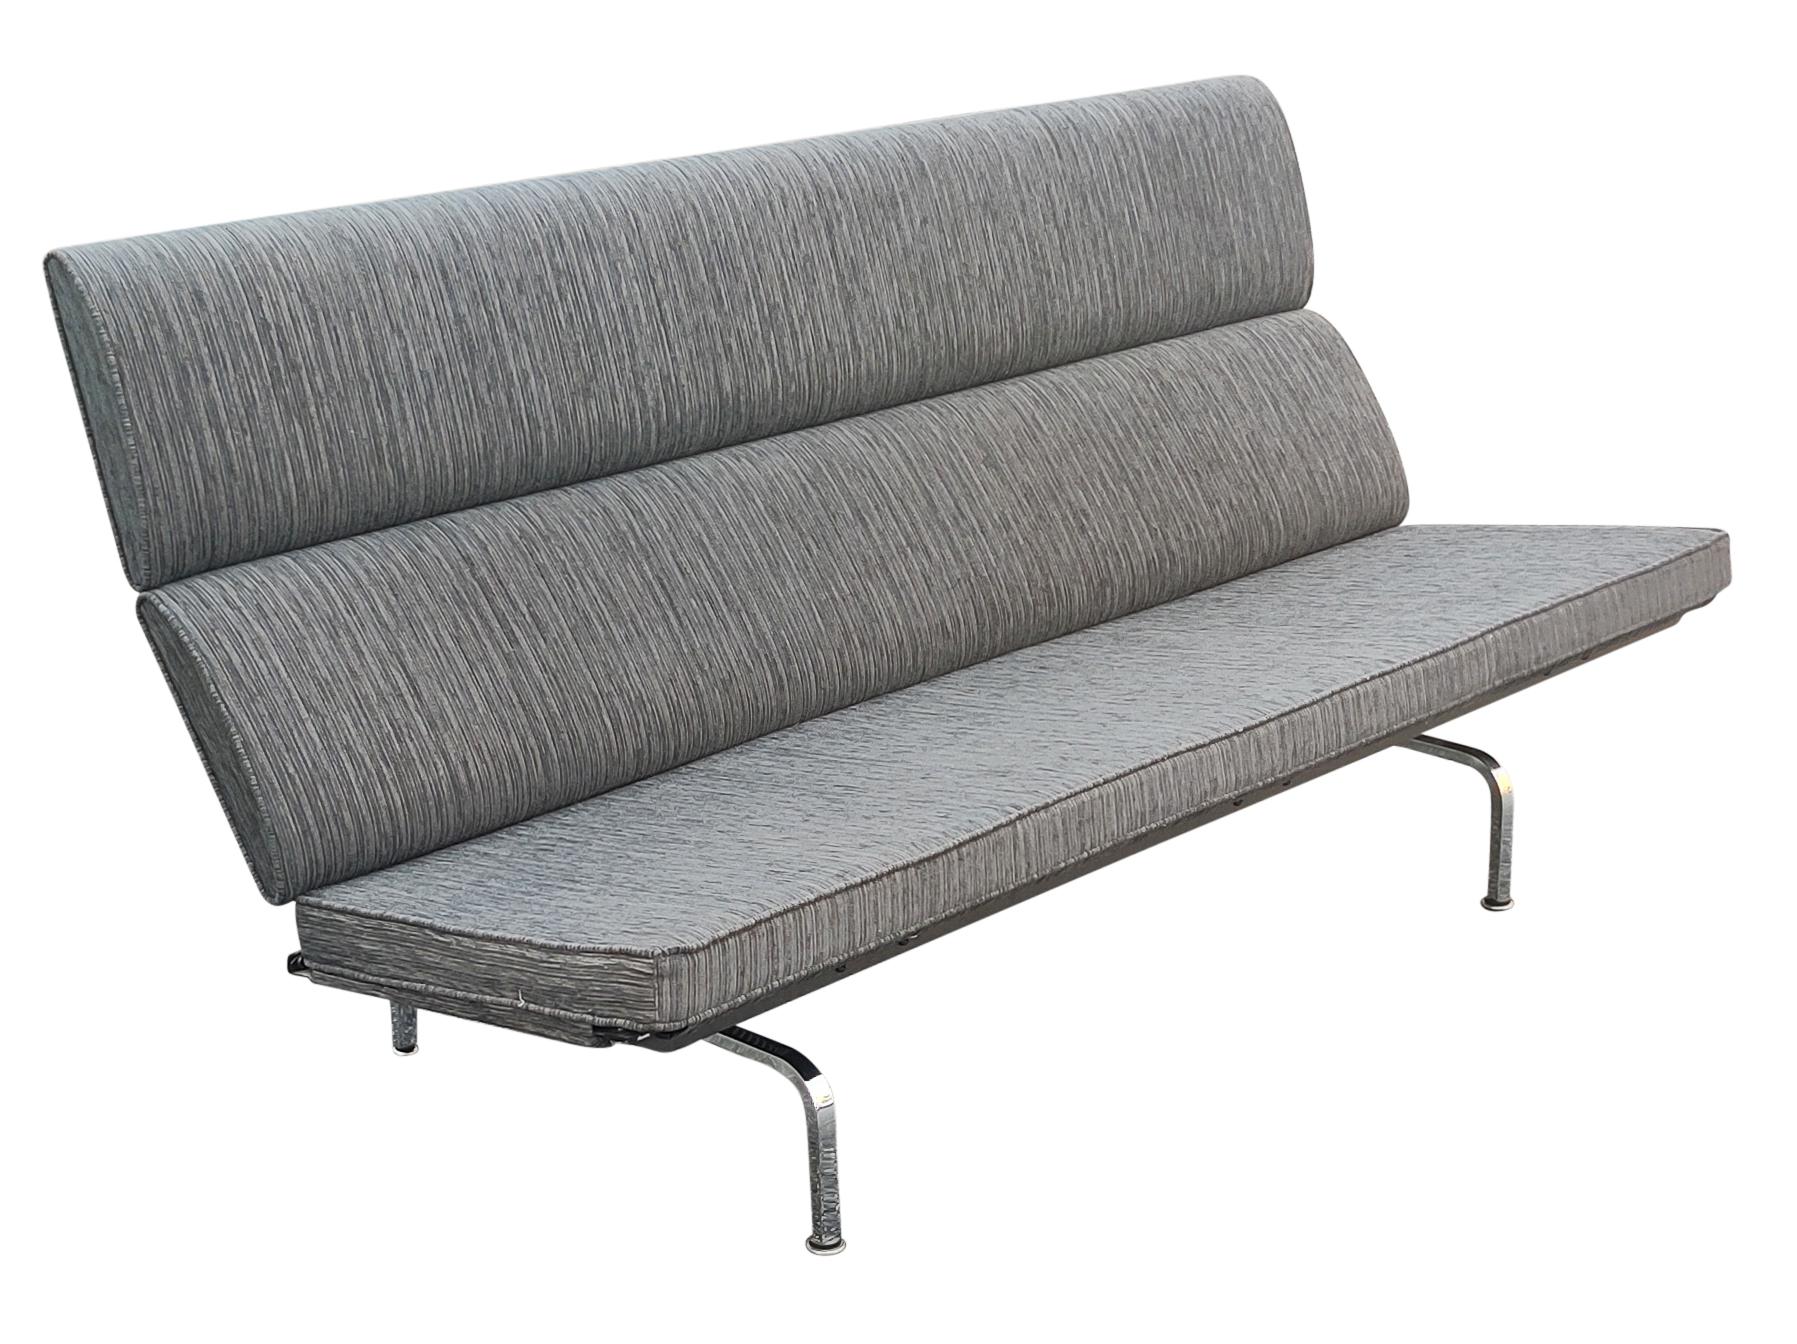 From Herham Miller website: Why “compact” for a sofa that’s six feet wide and seats three? The clean profile of the Eames sofa compact is perfectly scaled for spaces too small for a traditional sofa—in executive suites, lounges, and homes. But you